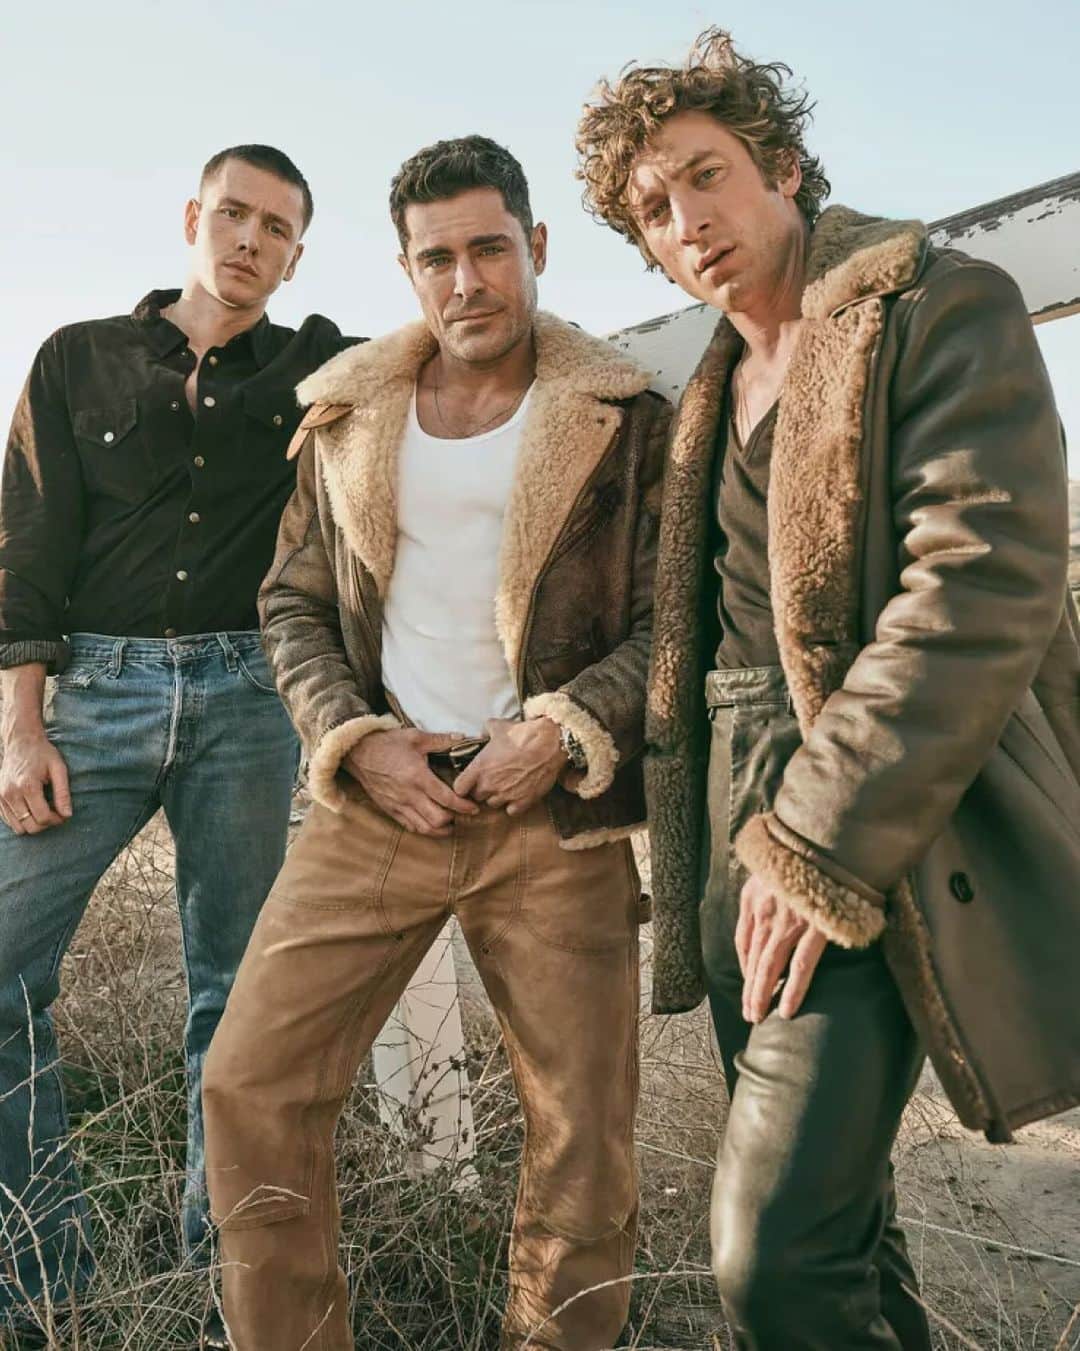 Polo Ralph Laurenのインスタグラム：「#ZacEfron, star of the upcoming movie #TheIronClaw, appears on the cover of @EntertainmentWeekly in our #PoloRalphLauren Shearling Biker Jacket and Canvas Carpenter Pant with his costars, #JeremyAllenWhite and #HarrisDickinson.  @BeauGrealy @HarrisDickinson @ZacEfron @JeremyAllenWhiteFinally @IlariaUrbinati  #PoloRLStyle #RLEditorials」